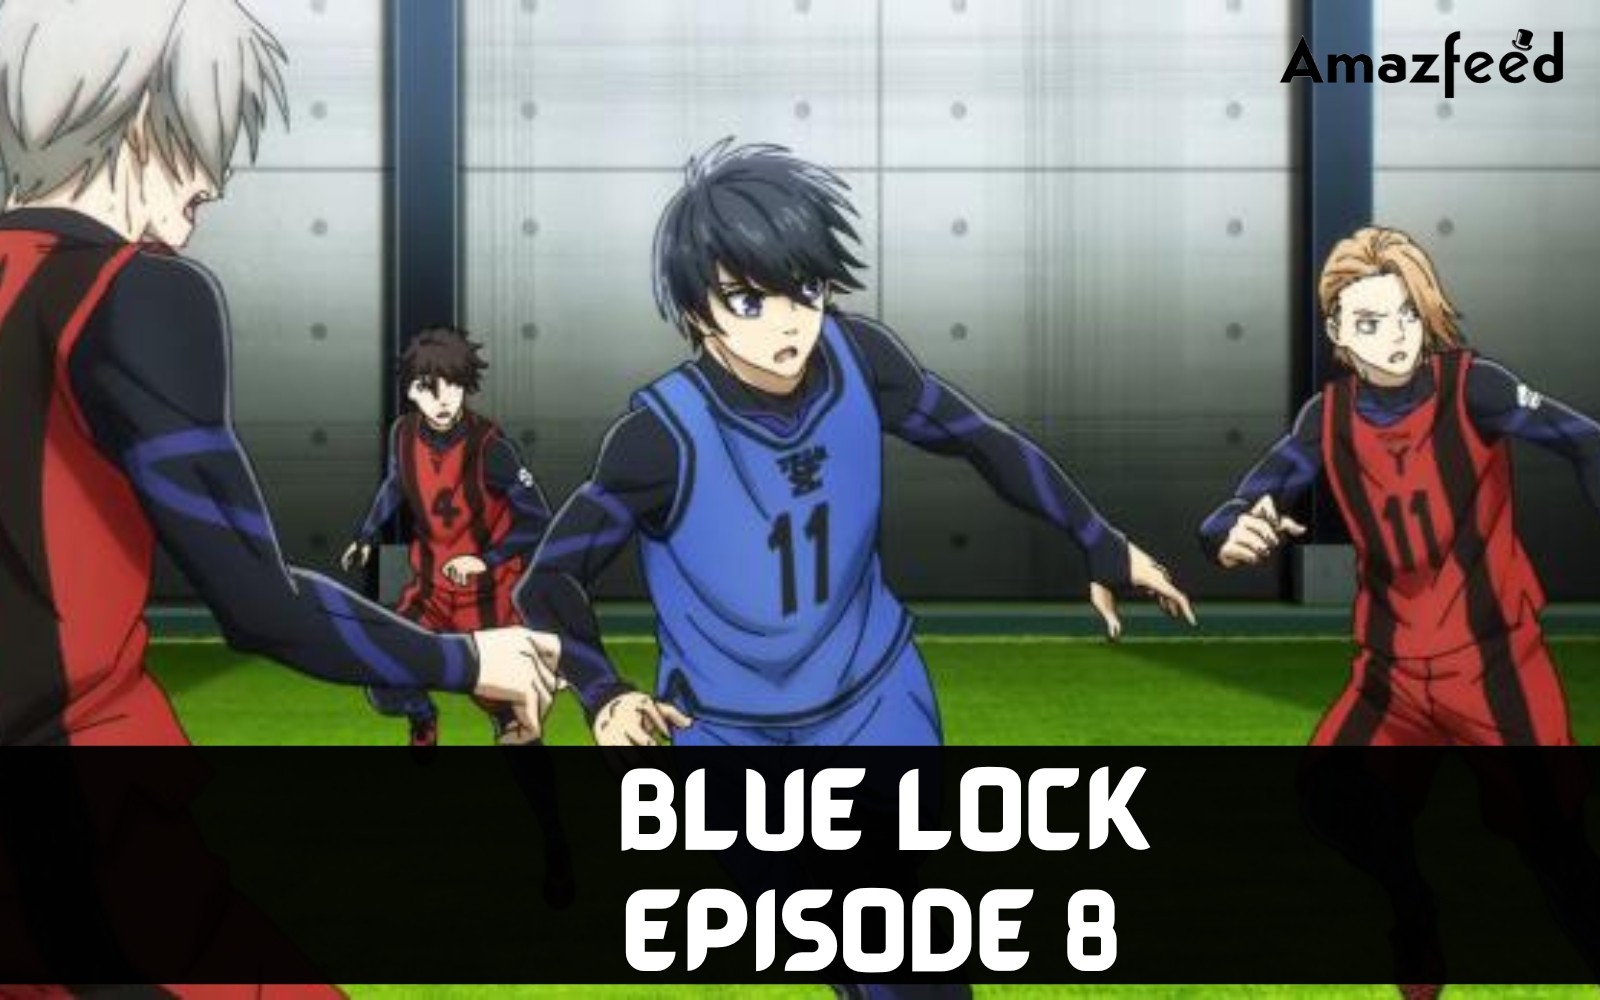 Blue Lock Episode 8 Review